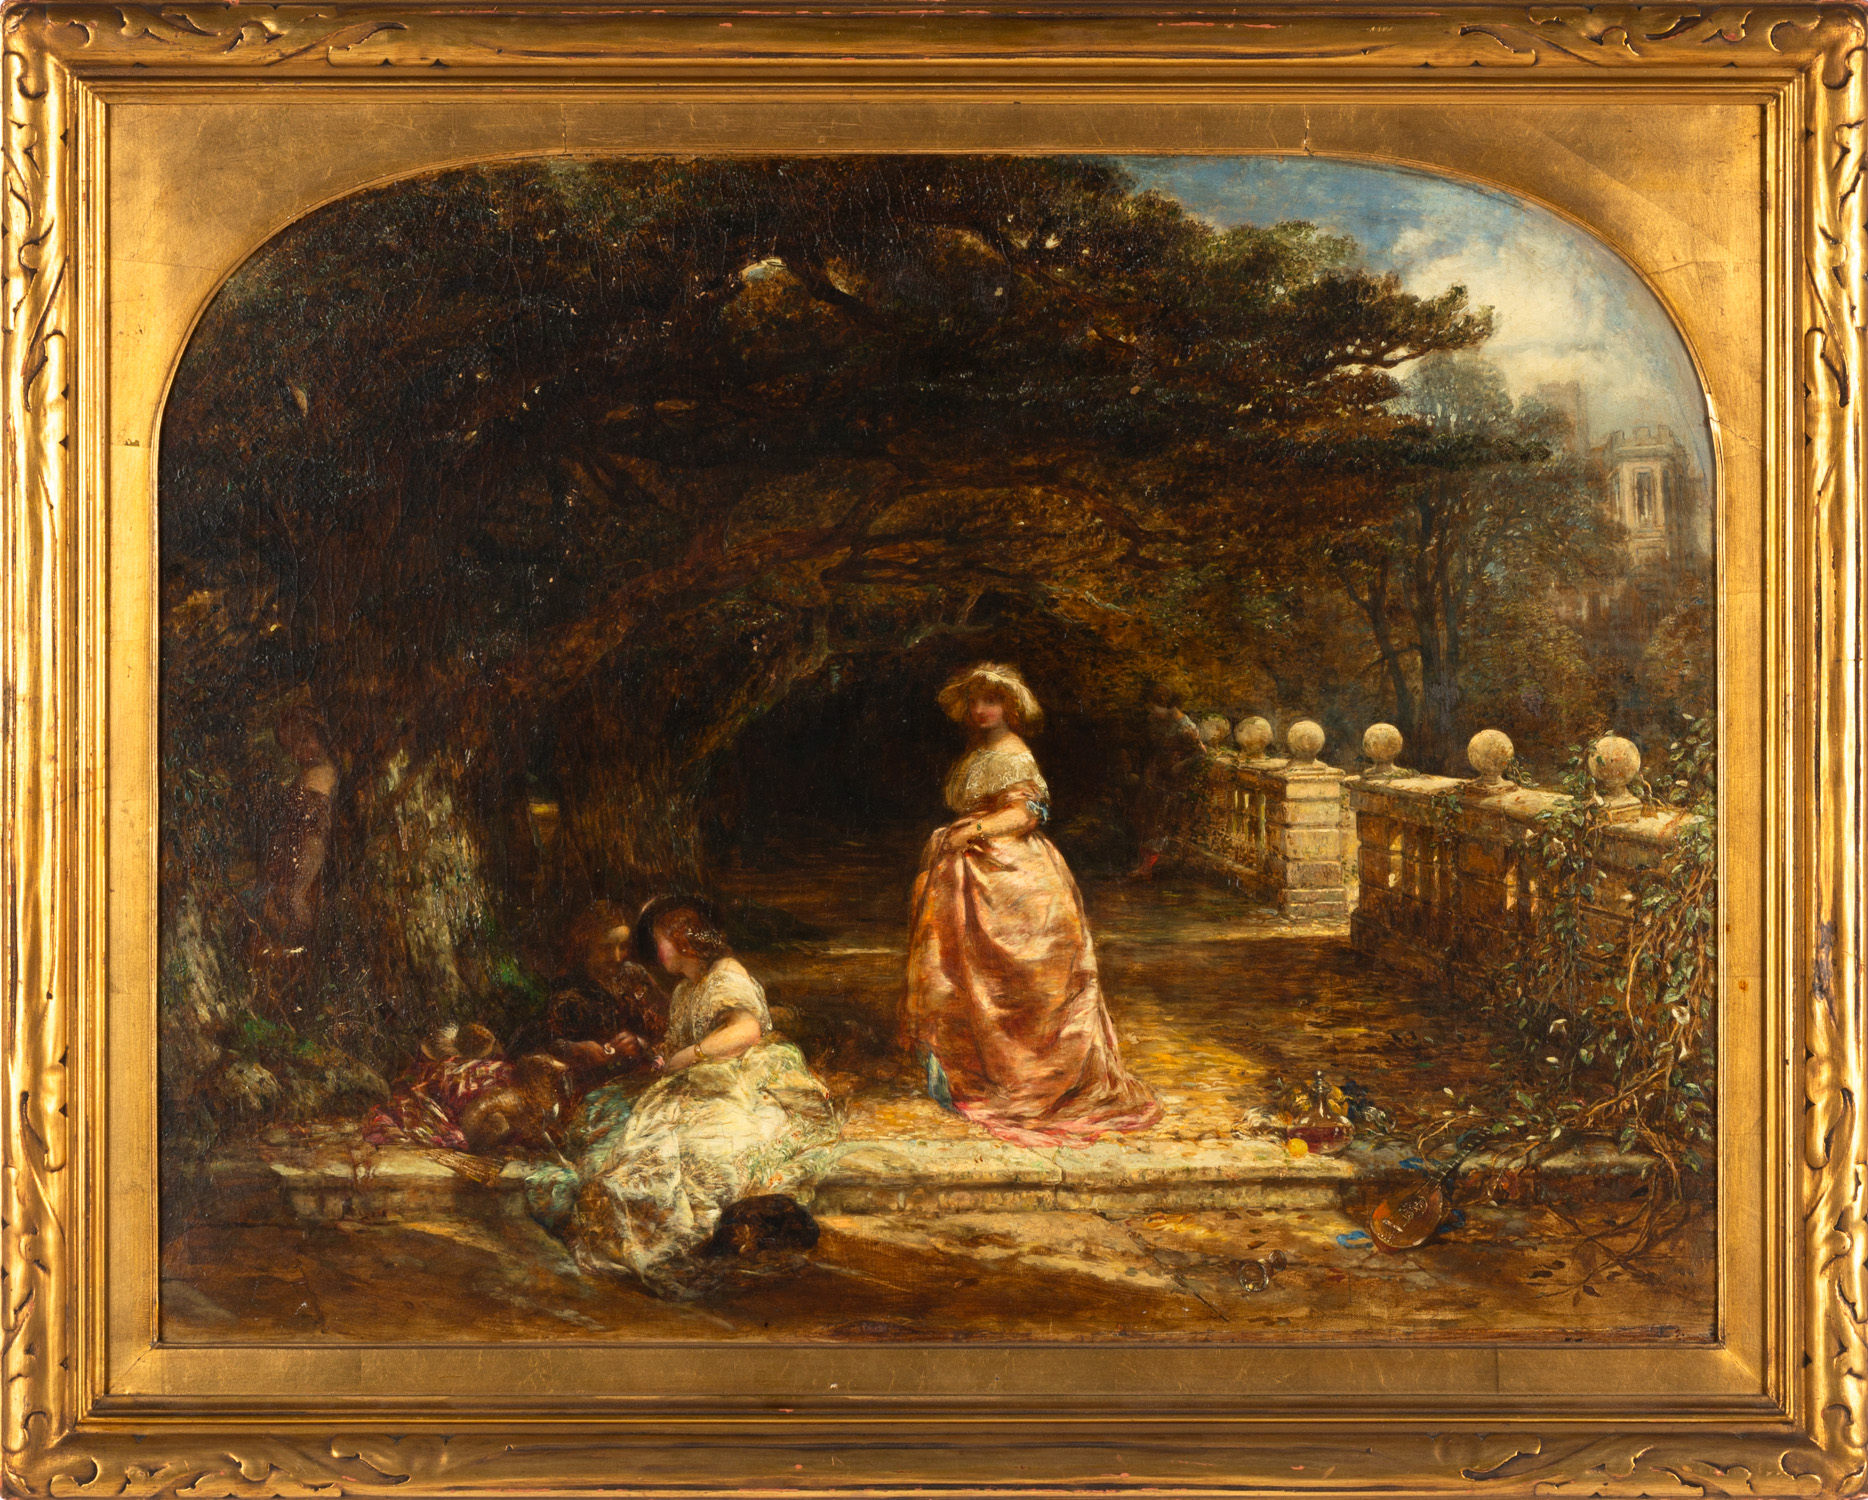 ATTRIBUTED TO ALFRED JOSEPH WOOLMER